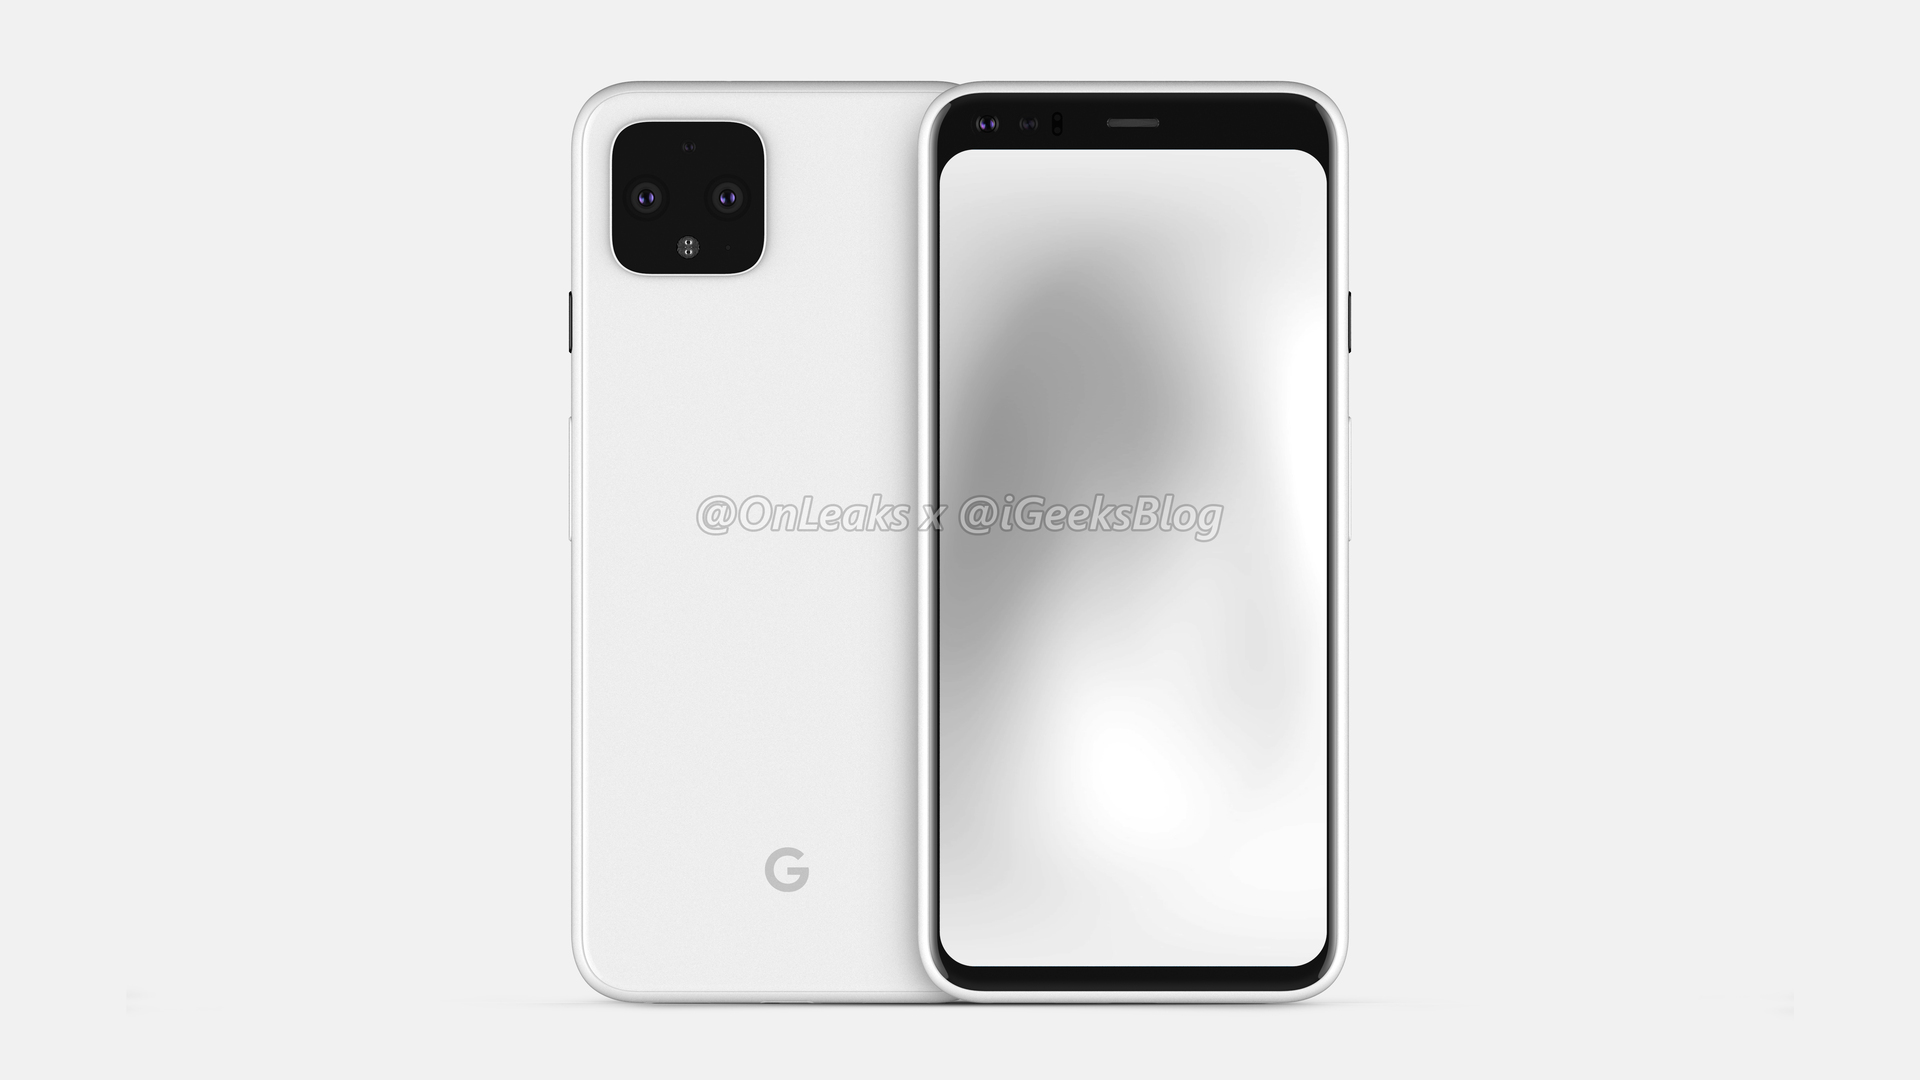 More evidence for 90Hz refresh rate on Google Pixel 4 series